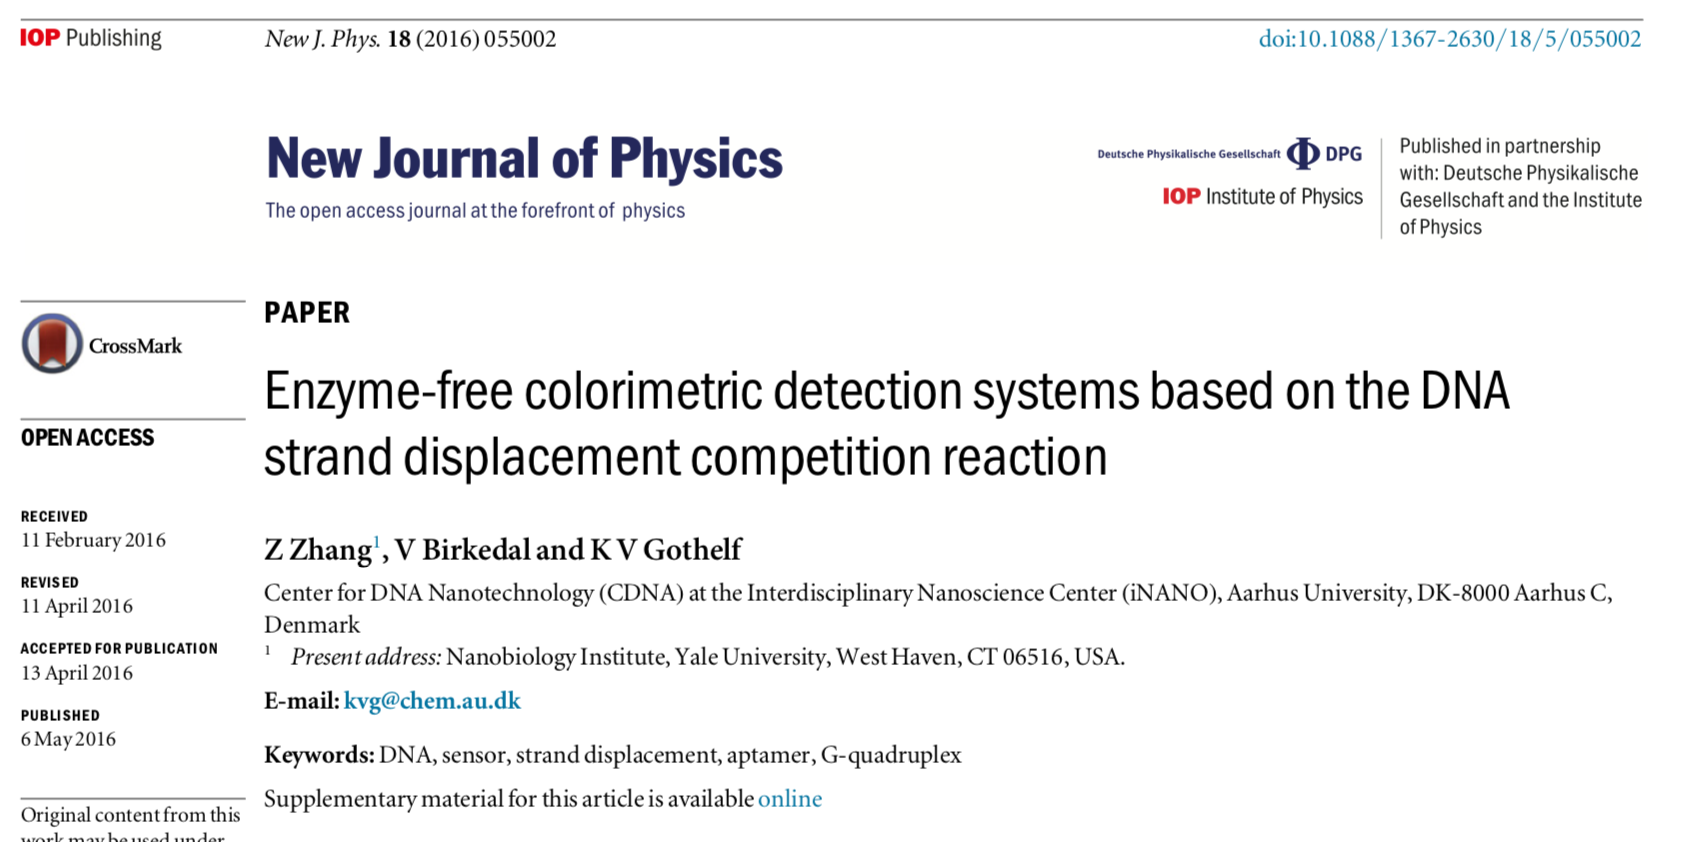 Screenshot of the article "Enzyme-free colorimetric detection systems based on the DNA strand displacement competition reaction" published in the New Journal of Physics